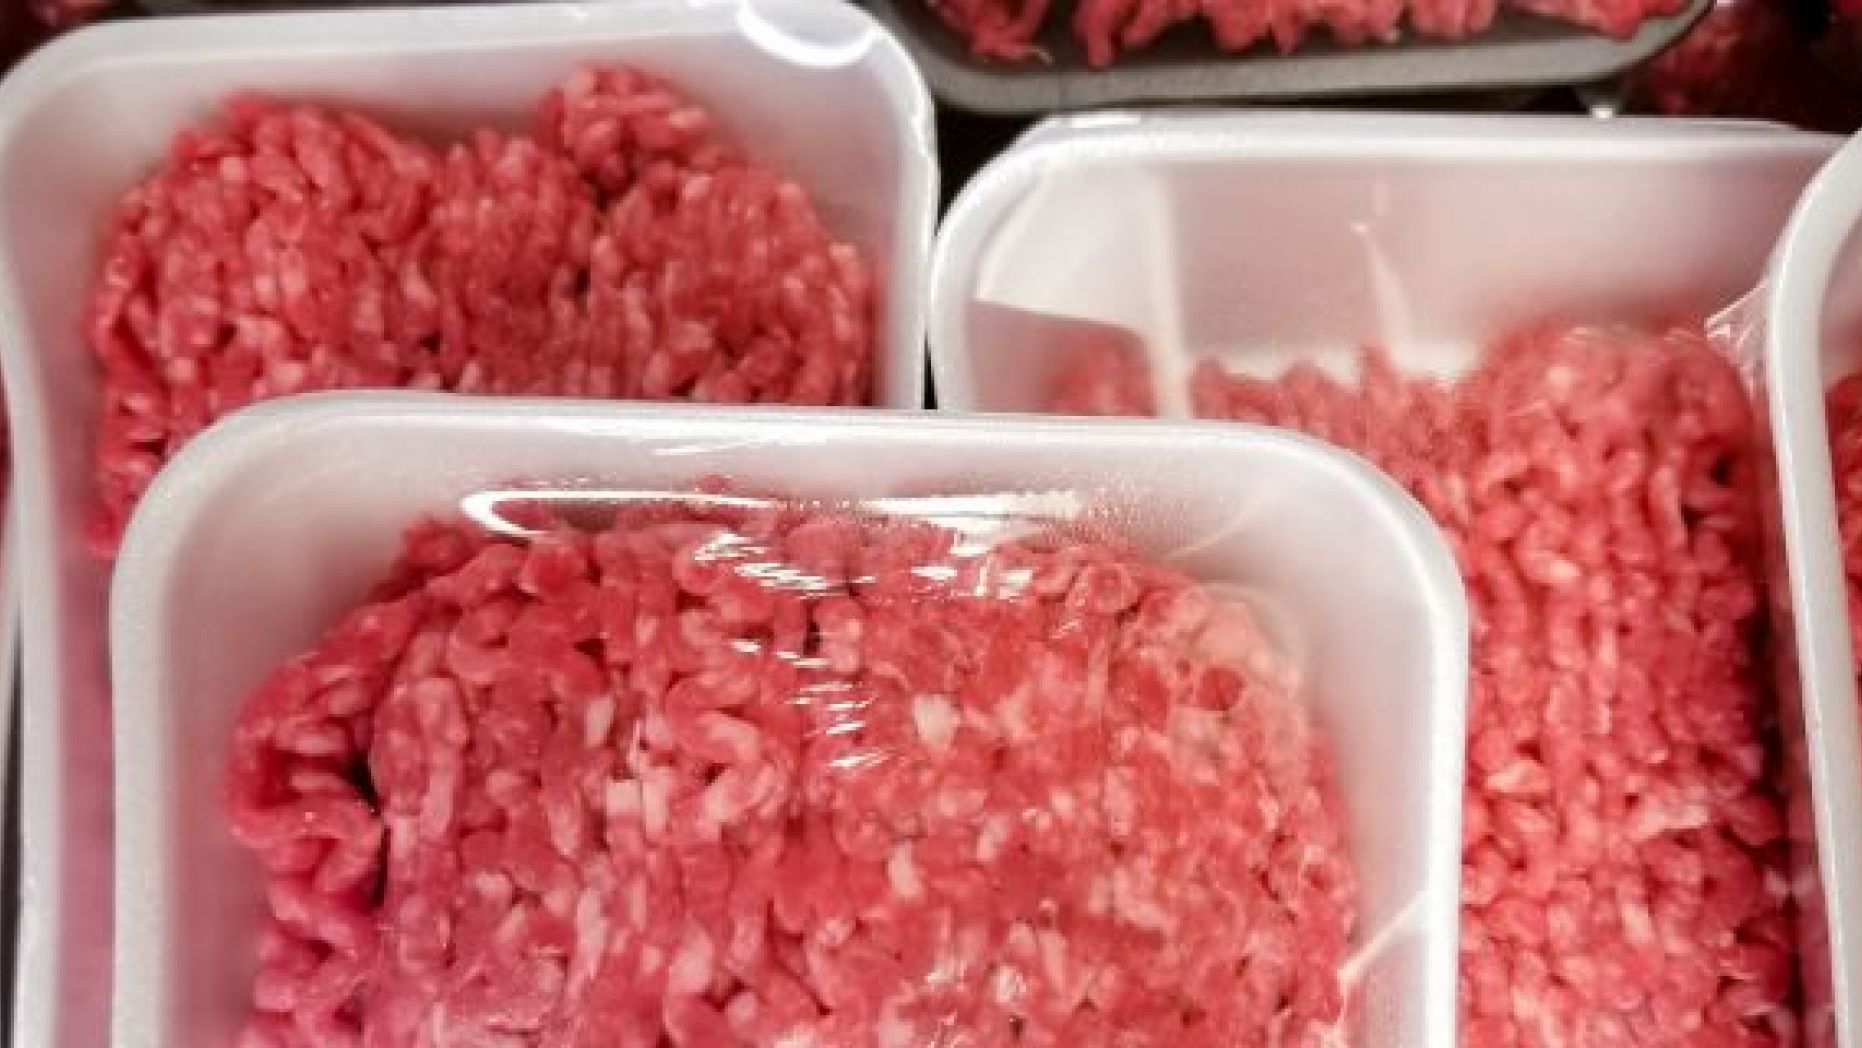 An investigation traced products including ground beef and beef patties to JBS Tolleson, Inc.